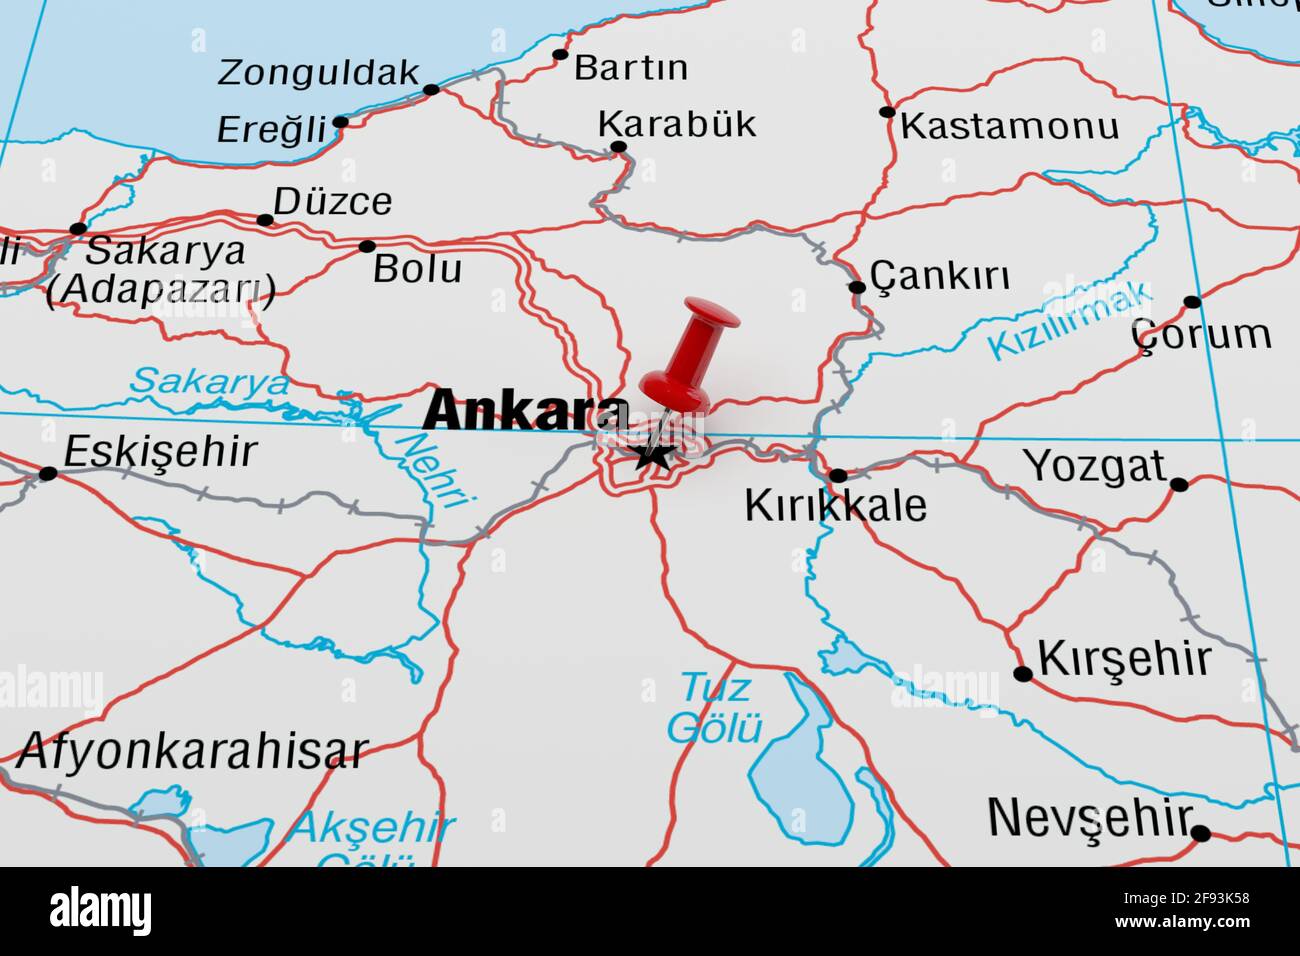 https www alamy com map showing ankara turkey with a red pin 3d rendering image418661636 html